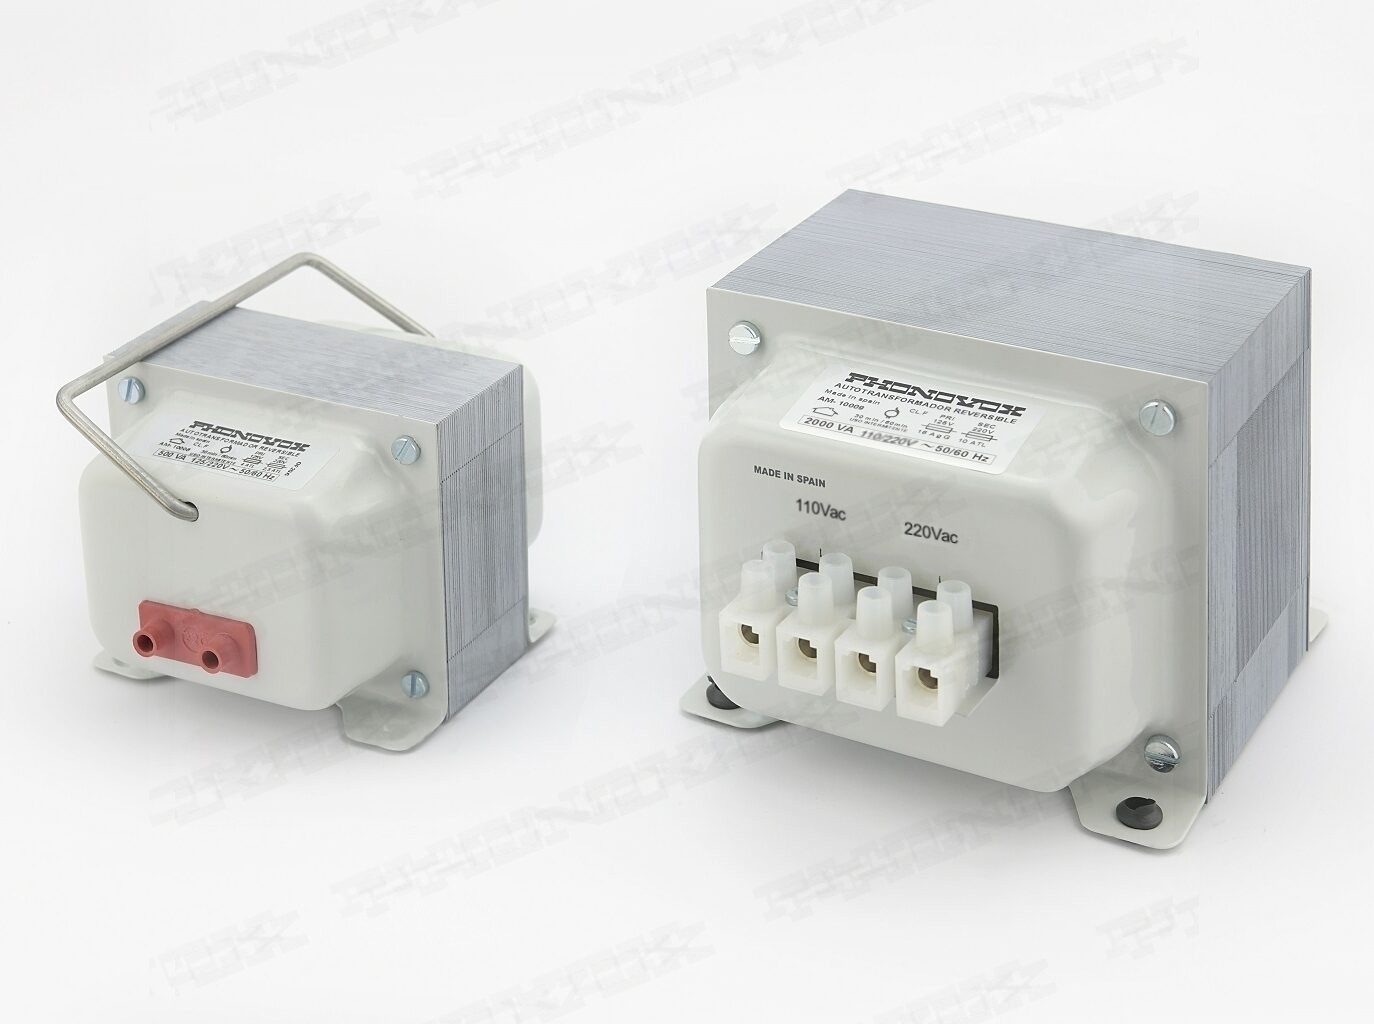 serie am-14 reversible single-phase autotransformers 110/220v ac